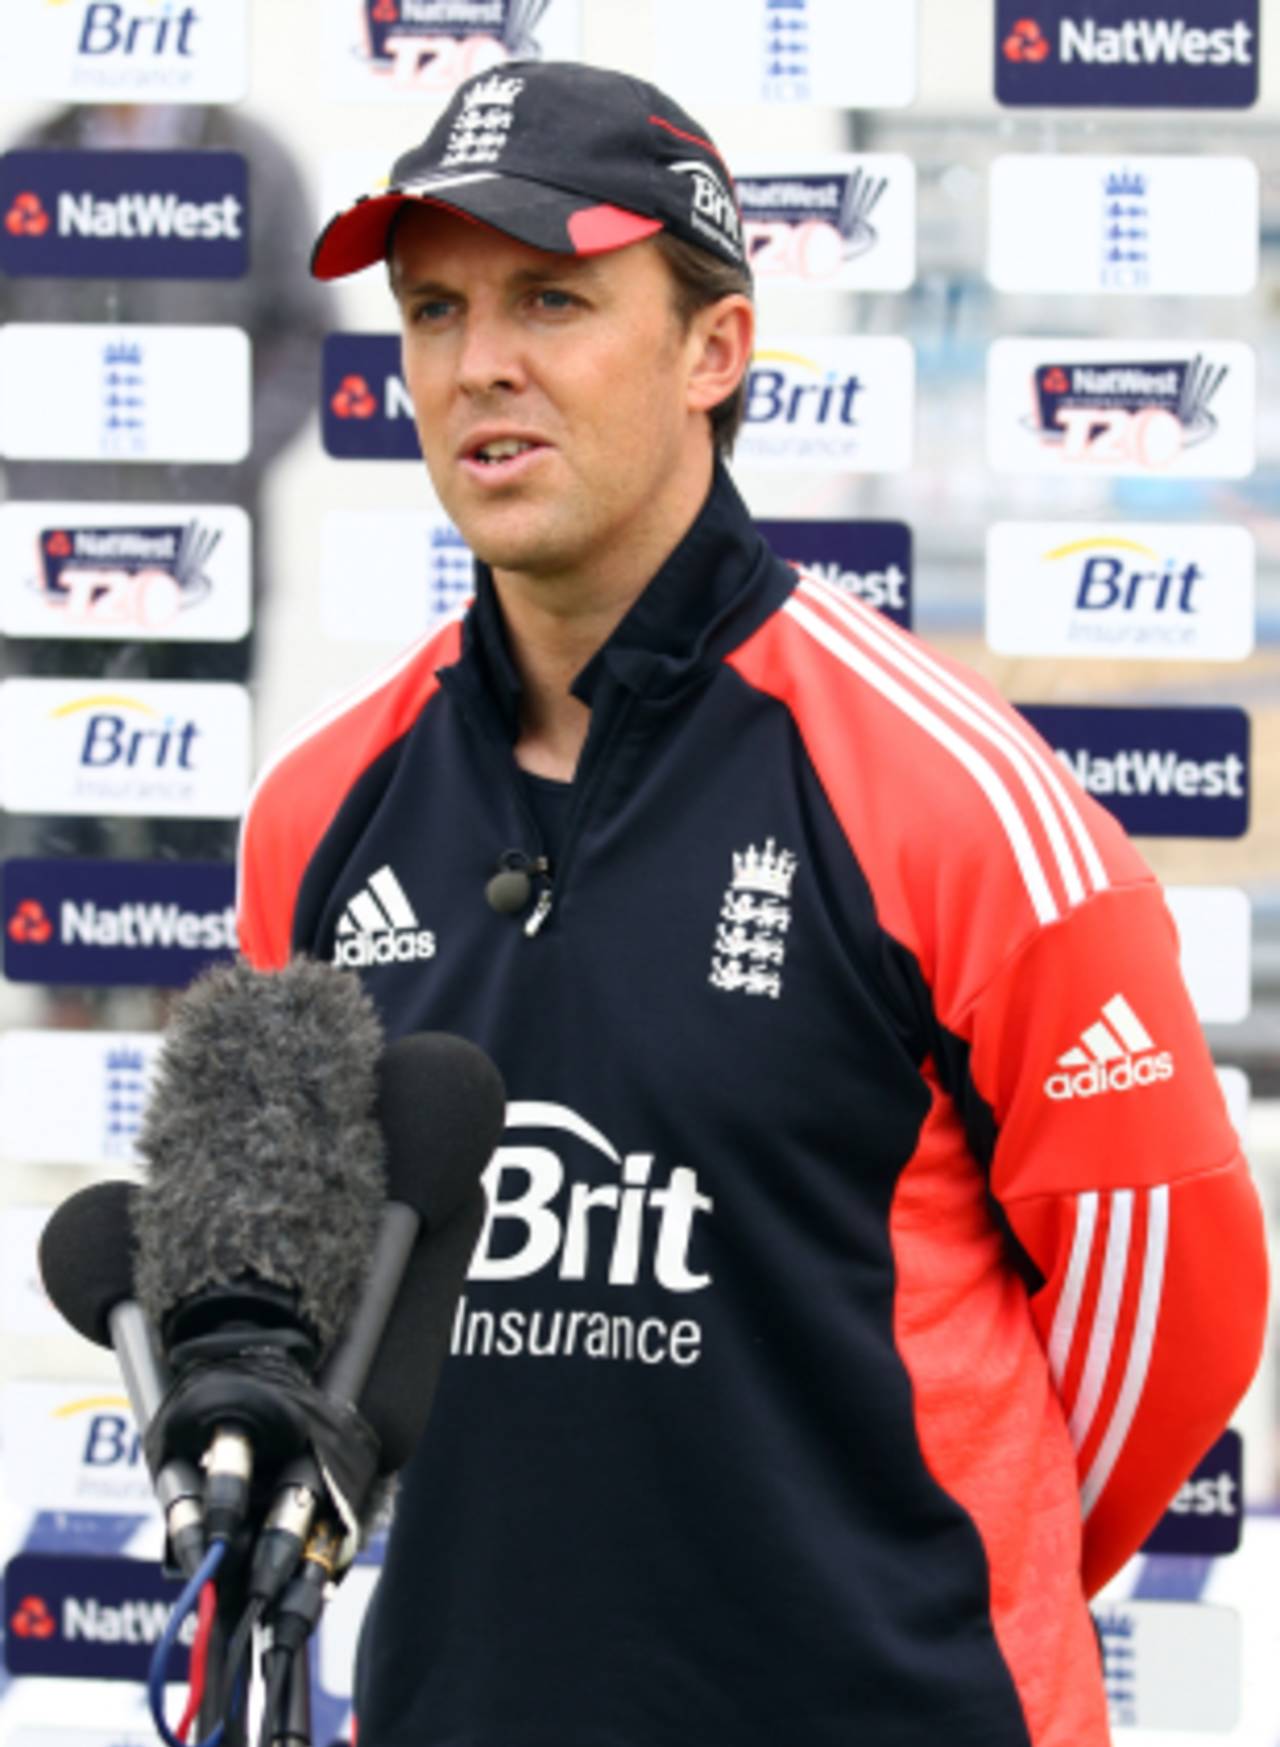 Graeme Swann chats to the media ahead of his stint as England's Twenty20 captain, The Oval, September 22 2011